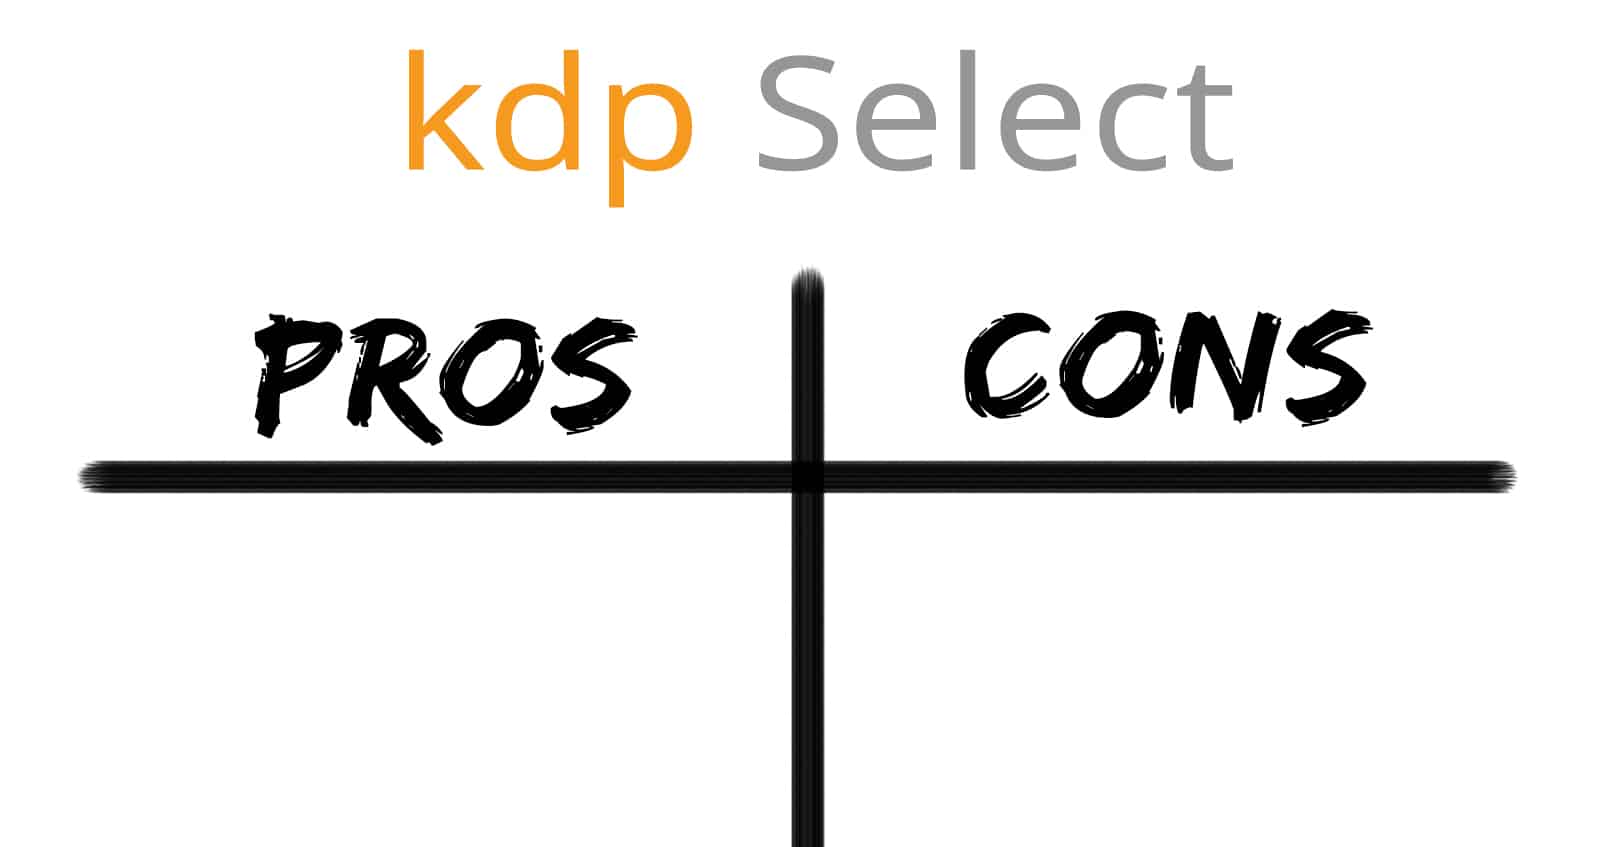 KDP Select Pros and Cons